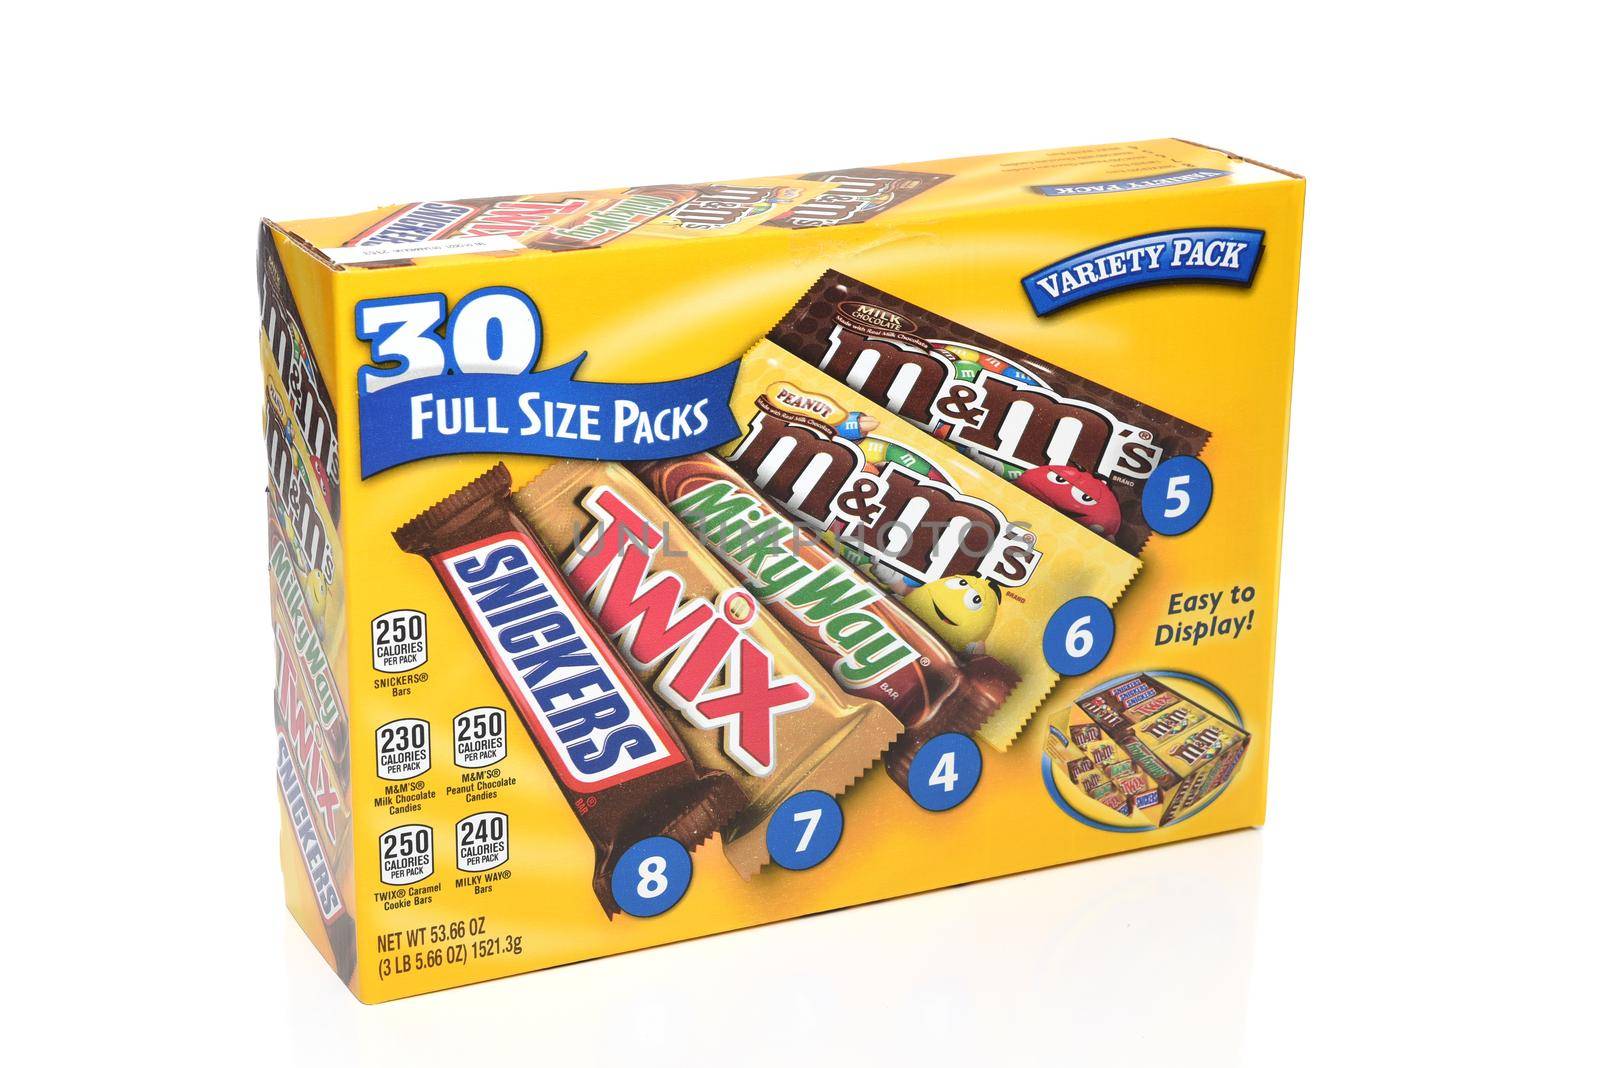 IRVINE, CALIFORNIA - 6 OCT 2020: A 30 count variety pack box of candy bars from Mars Wrigley.  by sCukrov